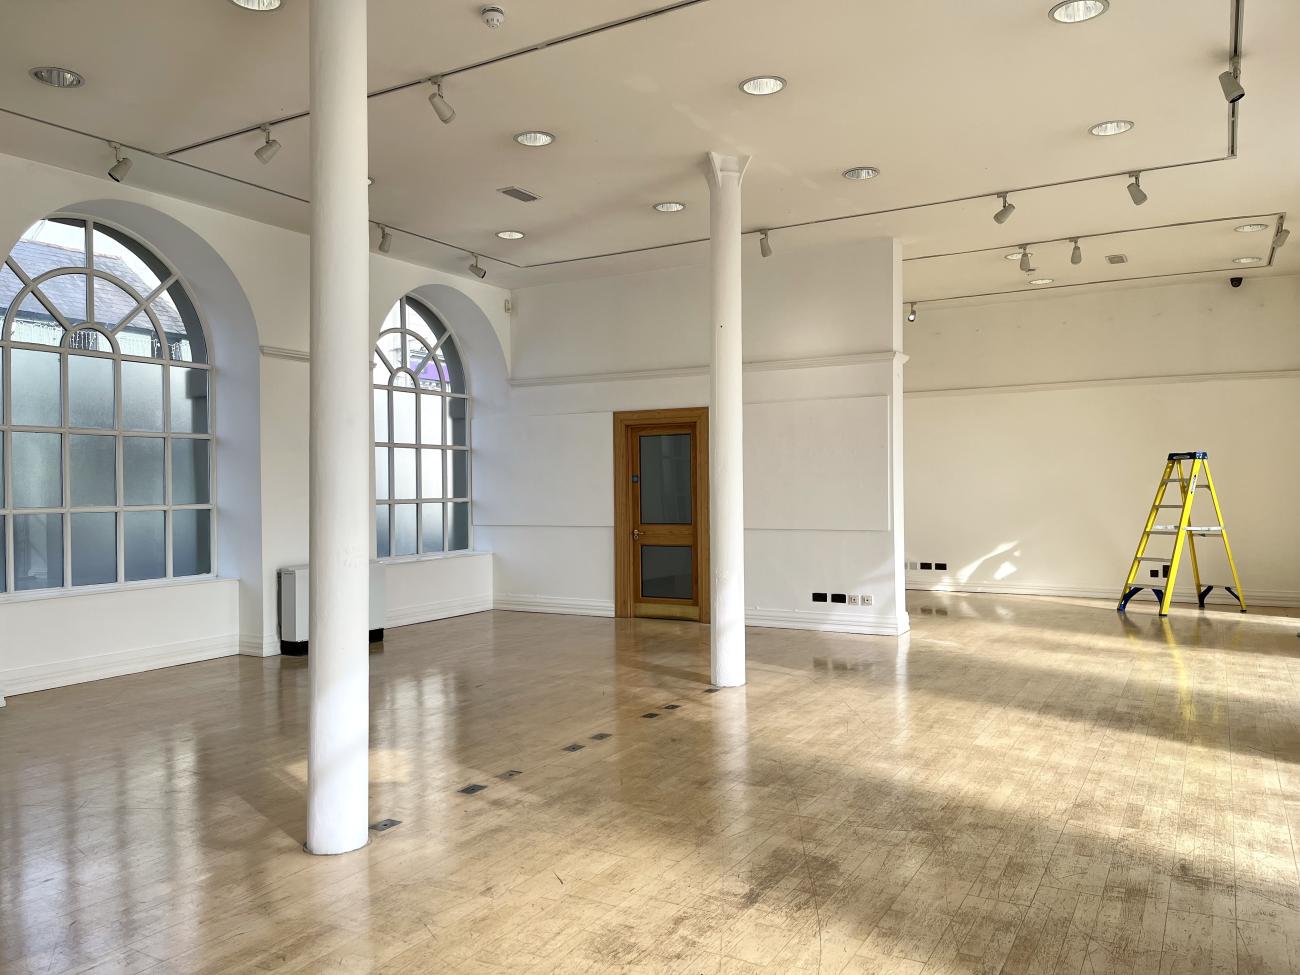 Image of an empty gallery at Ards Arts Centre with a step ladder in the far right corner